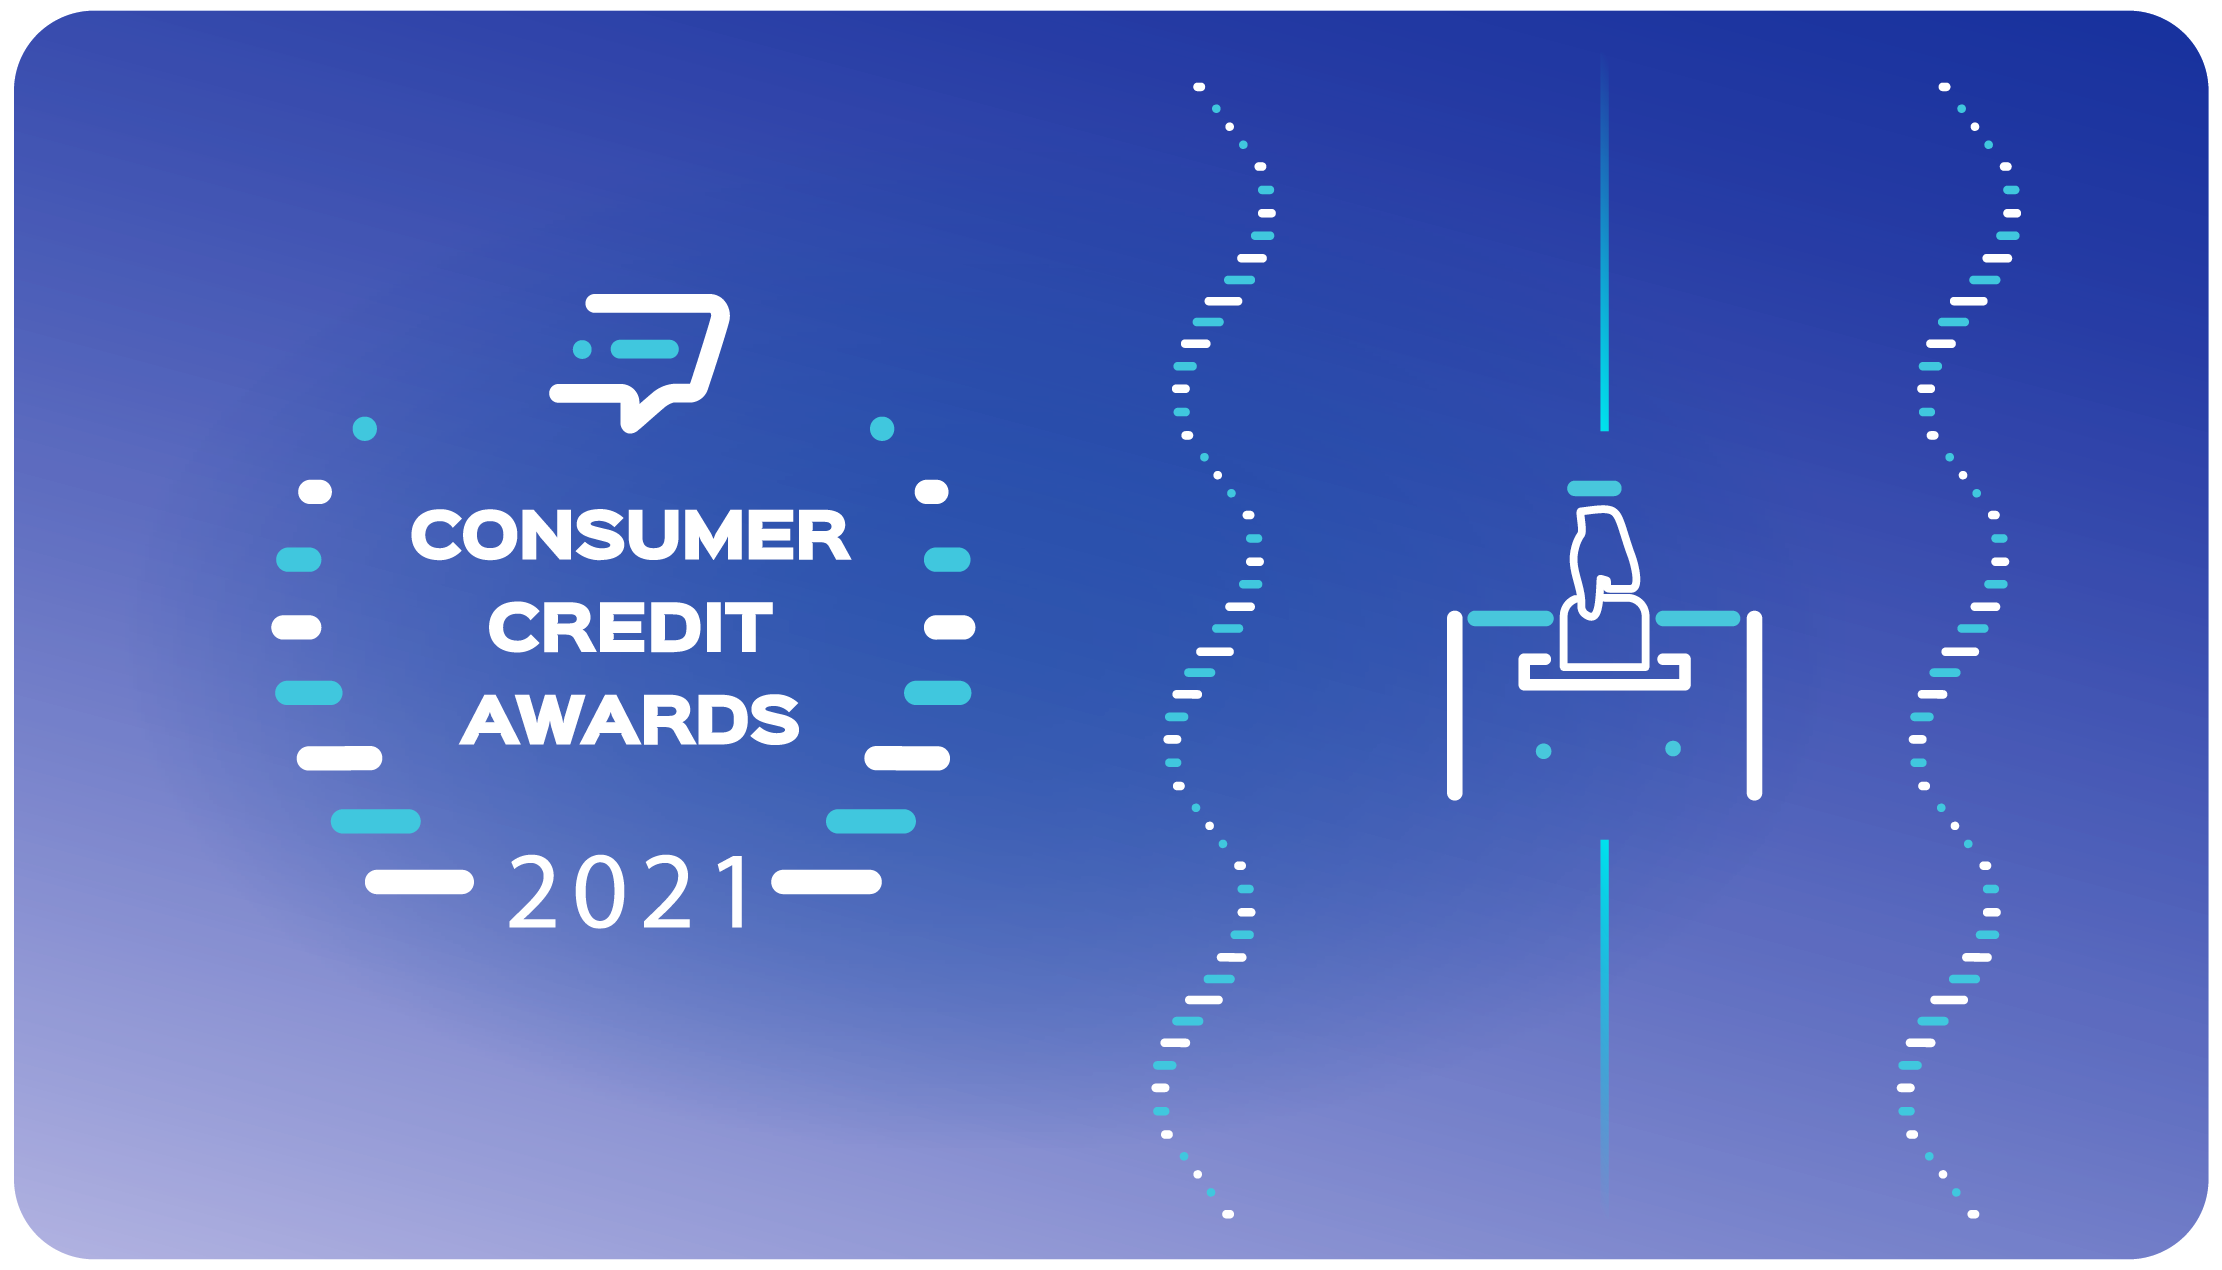 Consumer Credit Awards 2021 Is Now Open